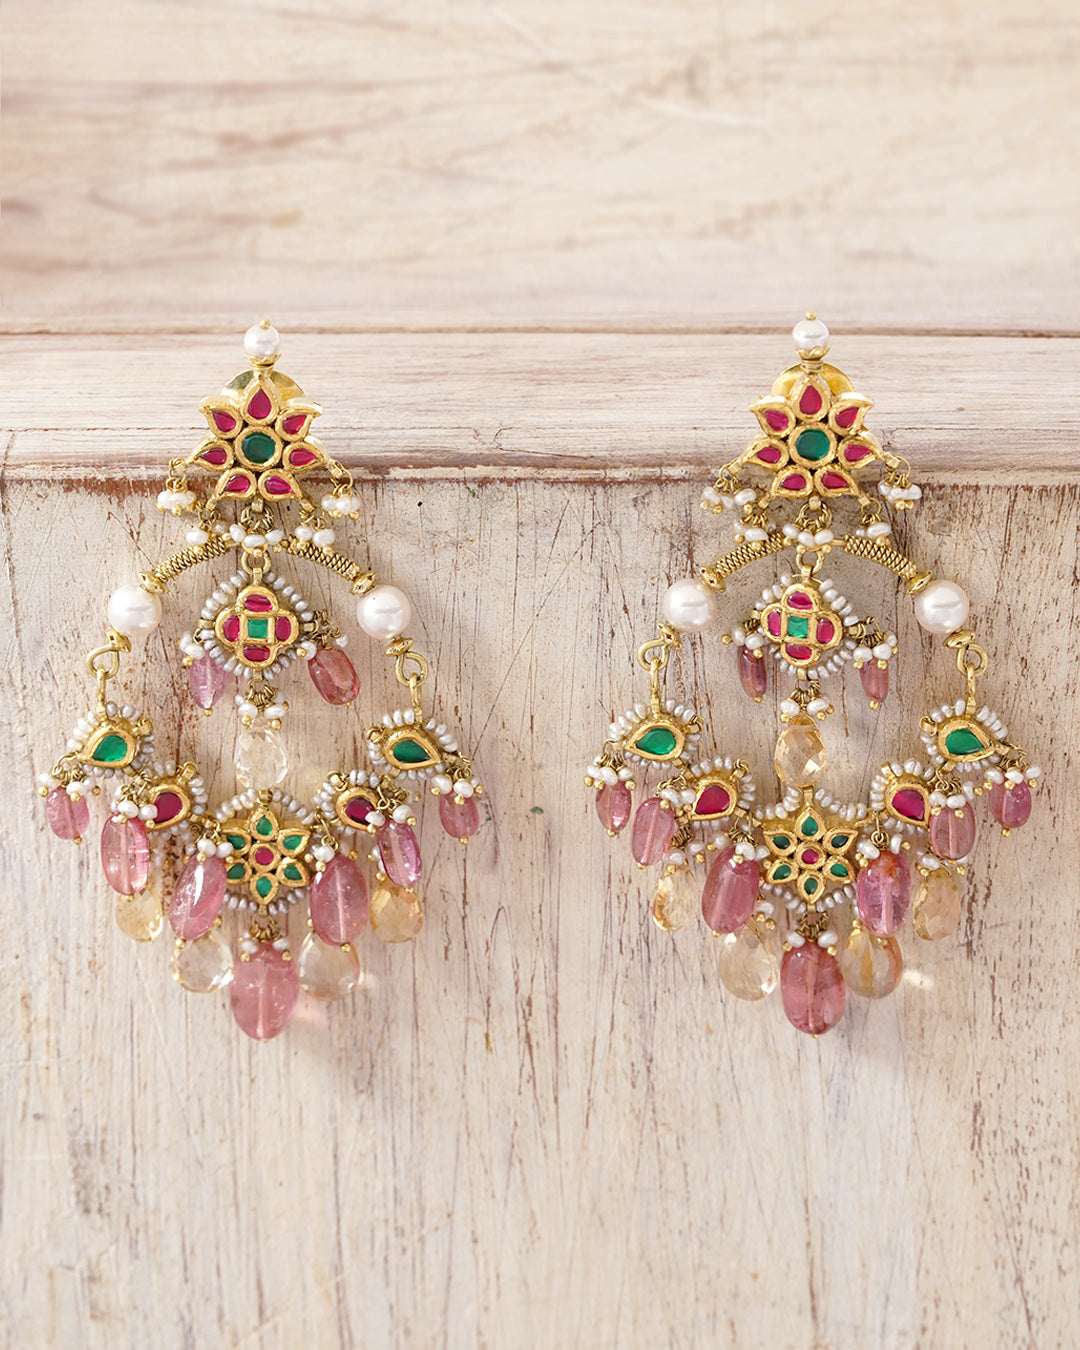 “Astonishing 4K Collection of 999+ Images of Earrings”